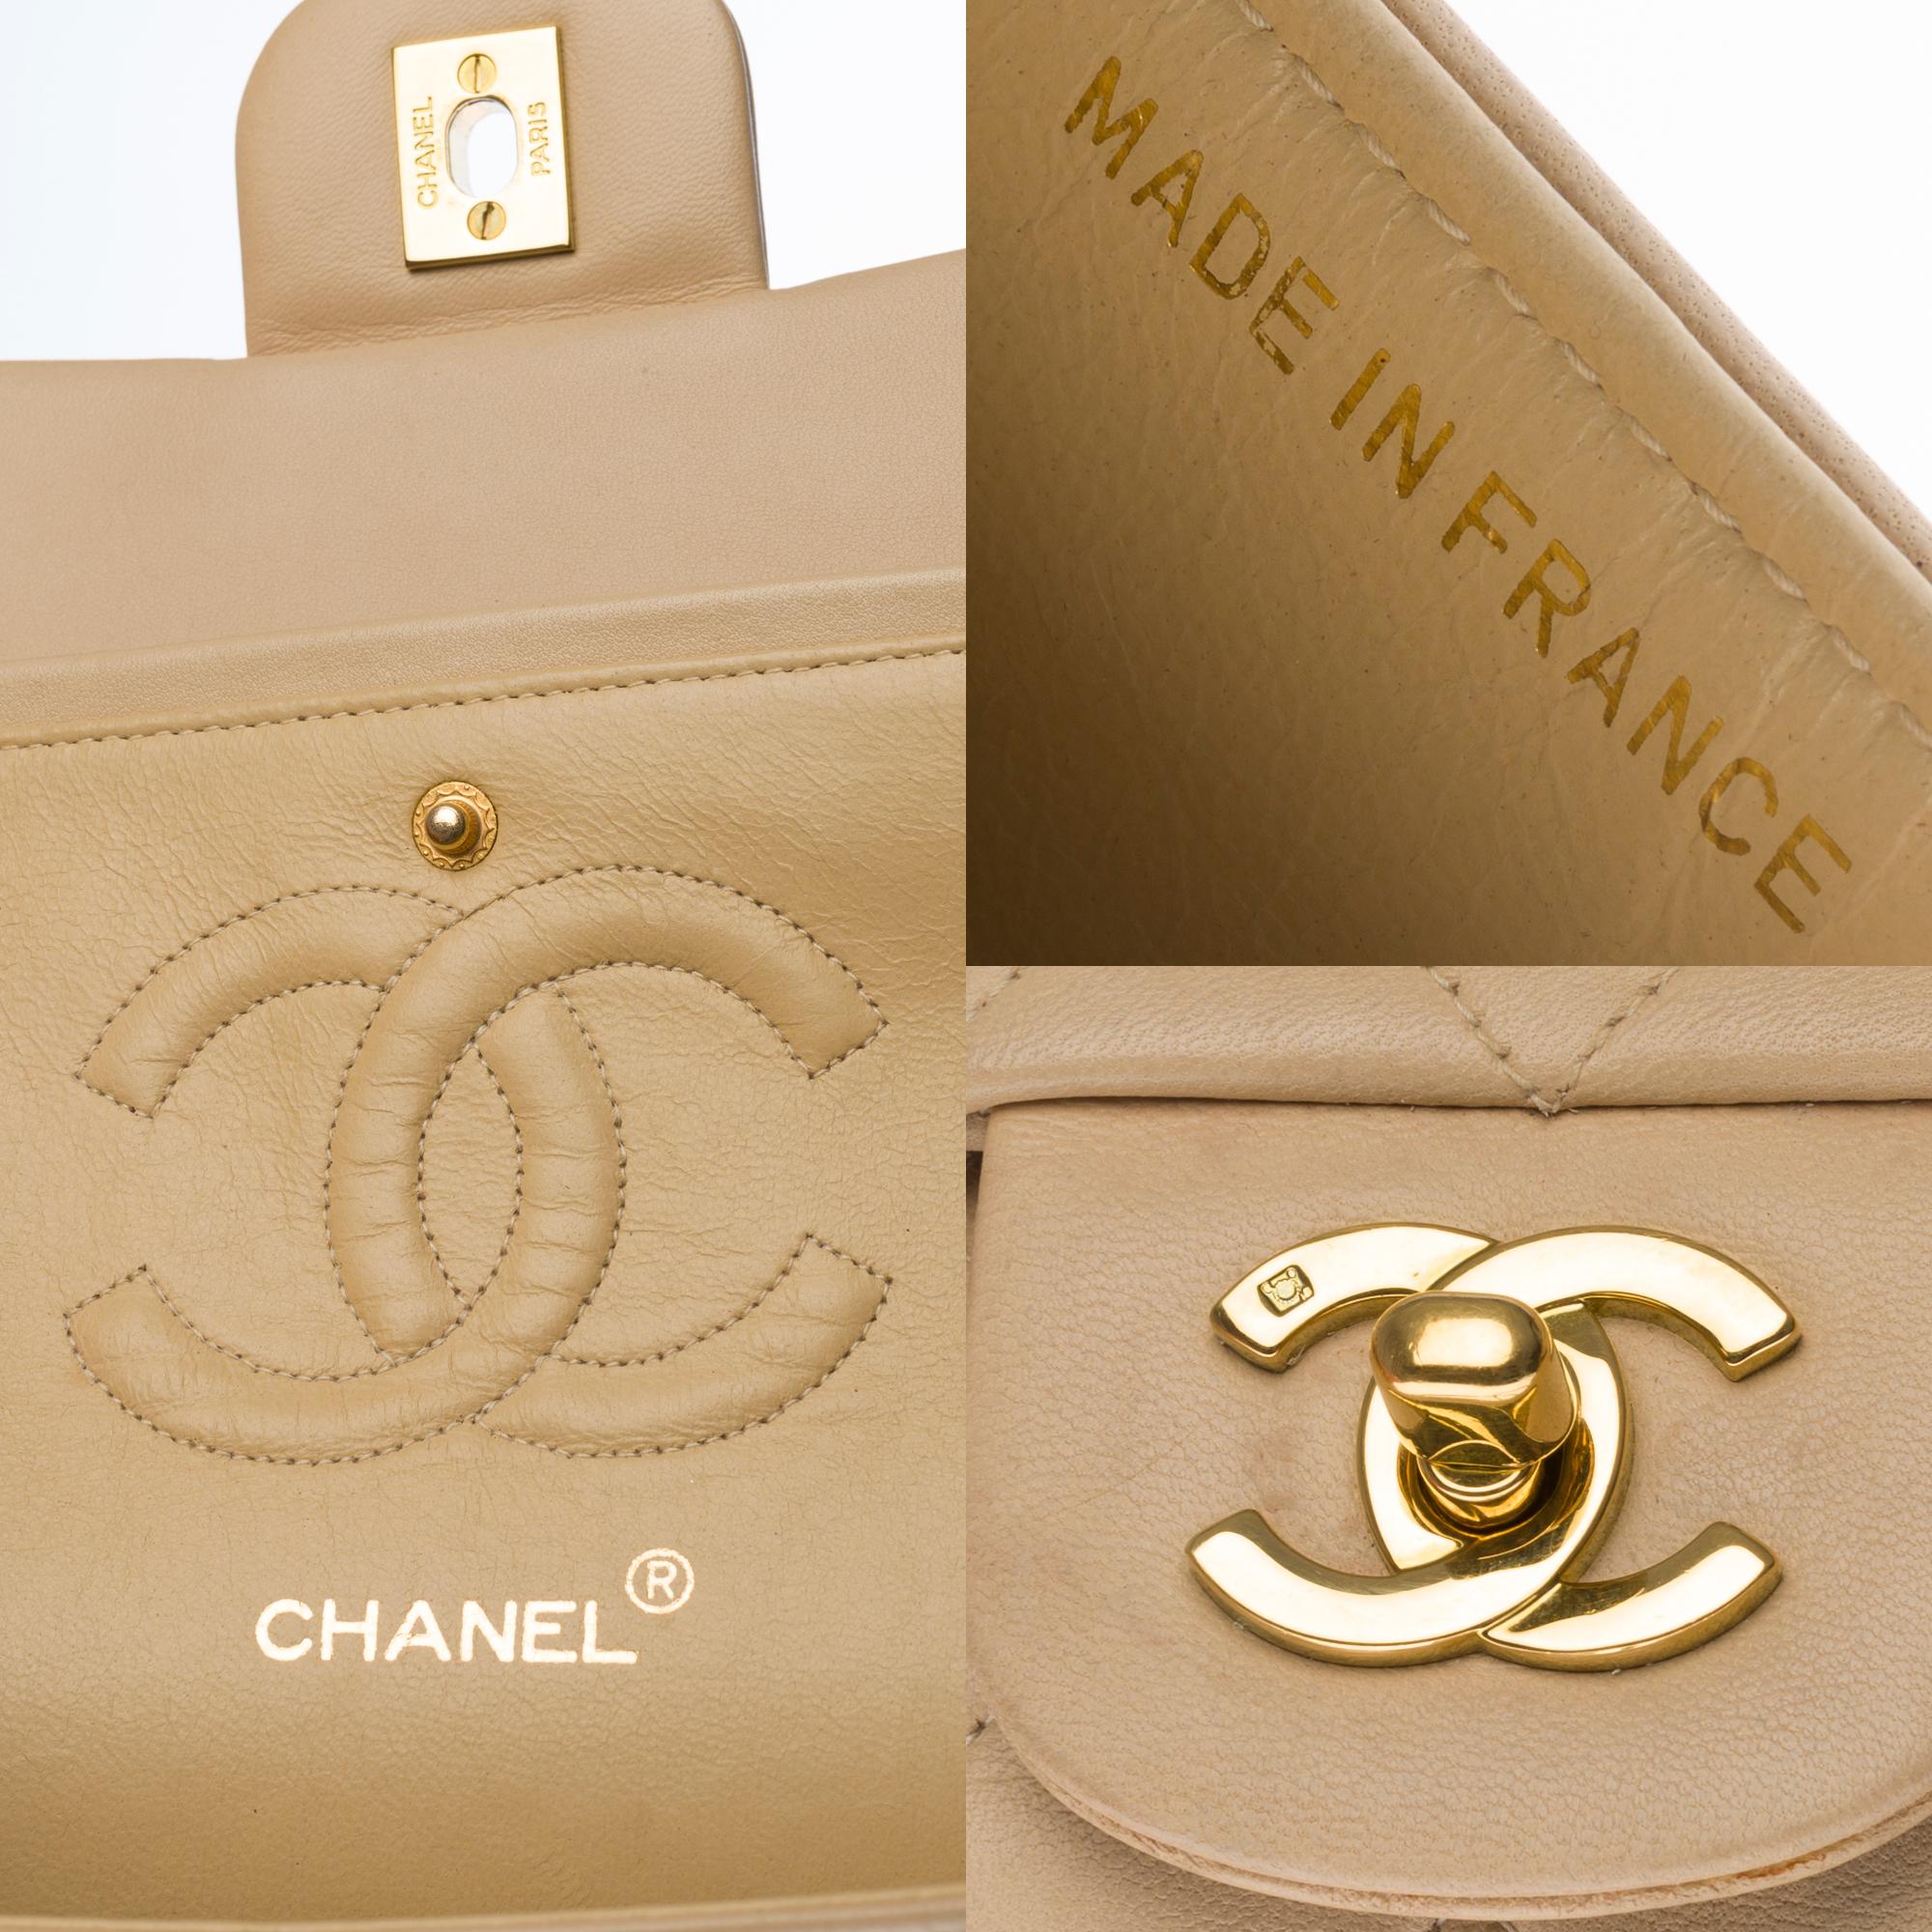 Chanel Timeless Medium double flap Shoulder bag in beige quilted leather, GHW 1